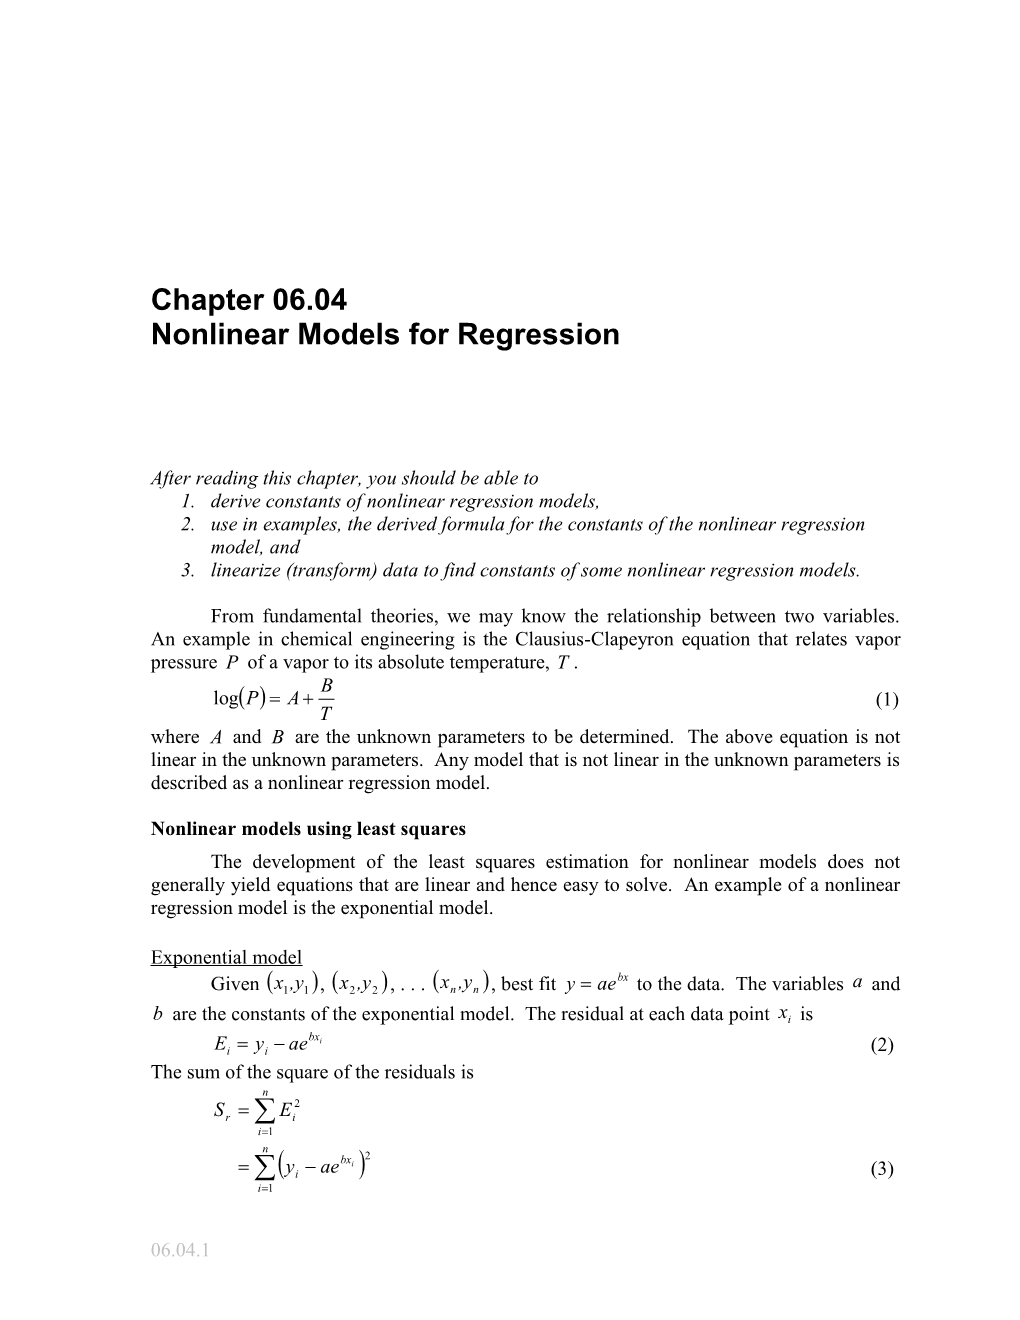 Nonlinear Models for Regression